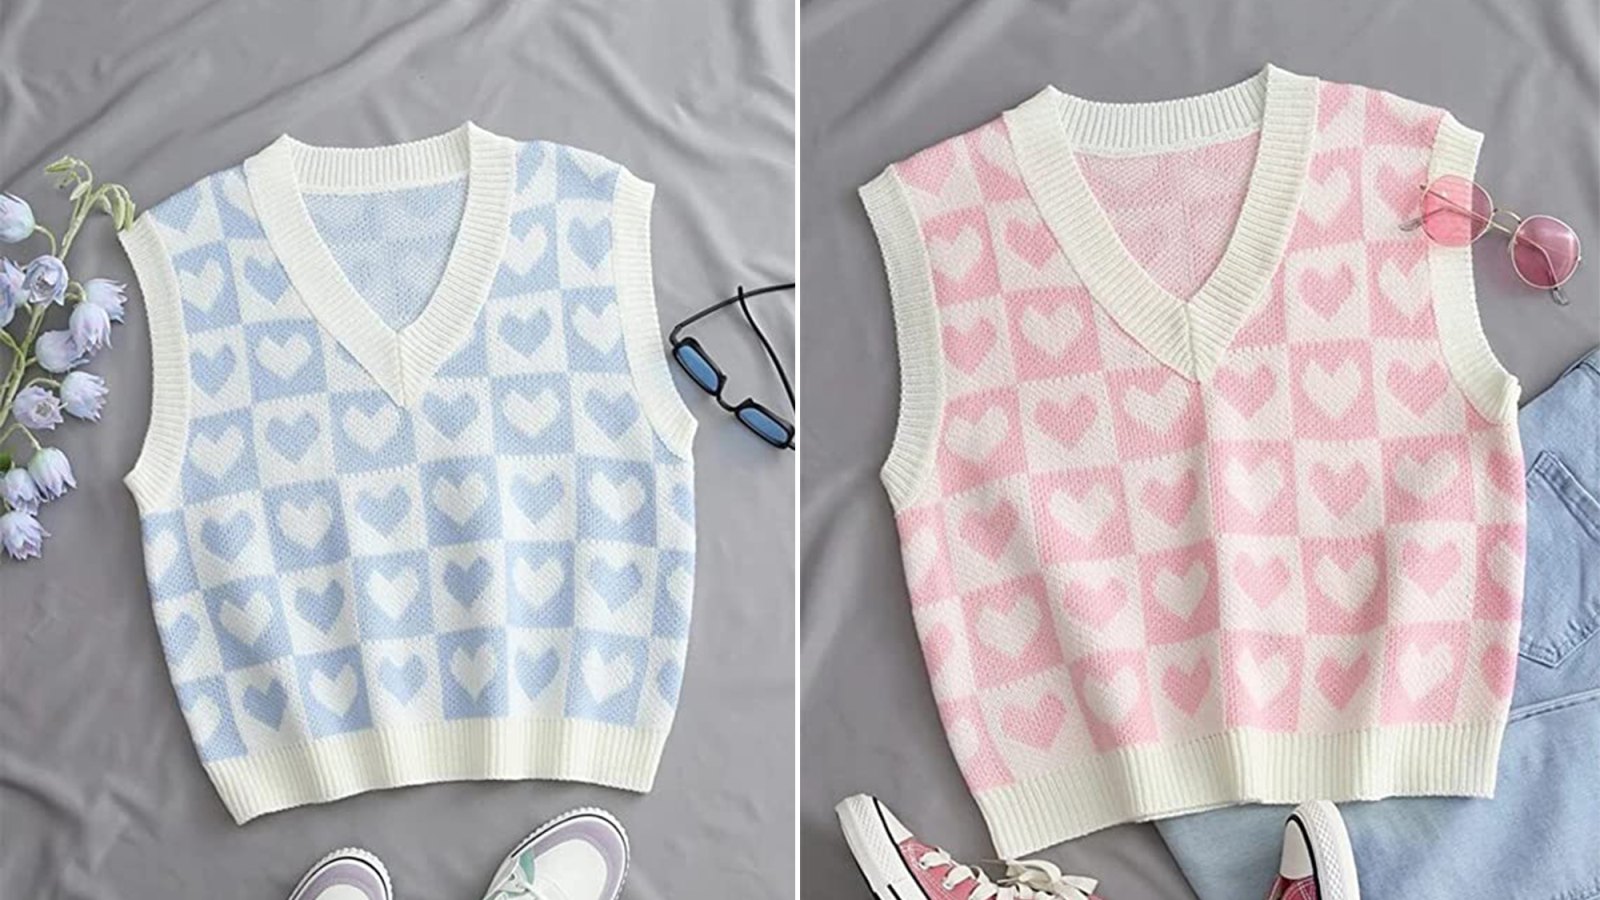 Safrisior Heart Print Sweater Vest Is a Cute Take on a Classic Style